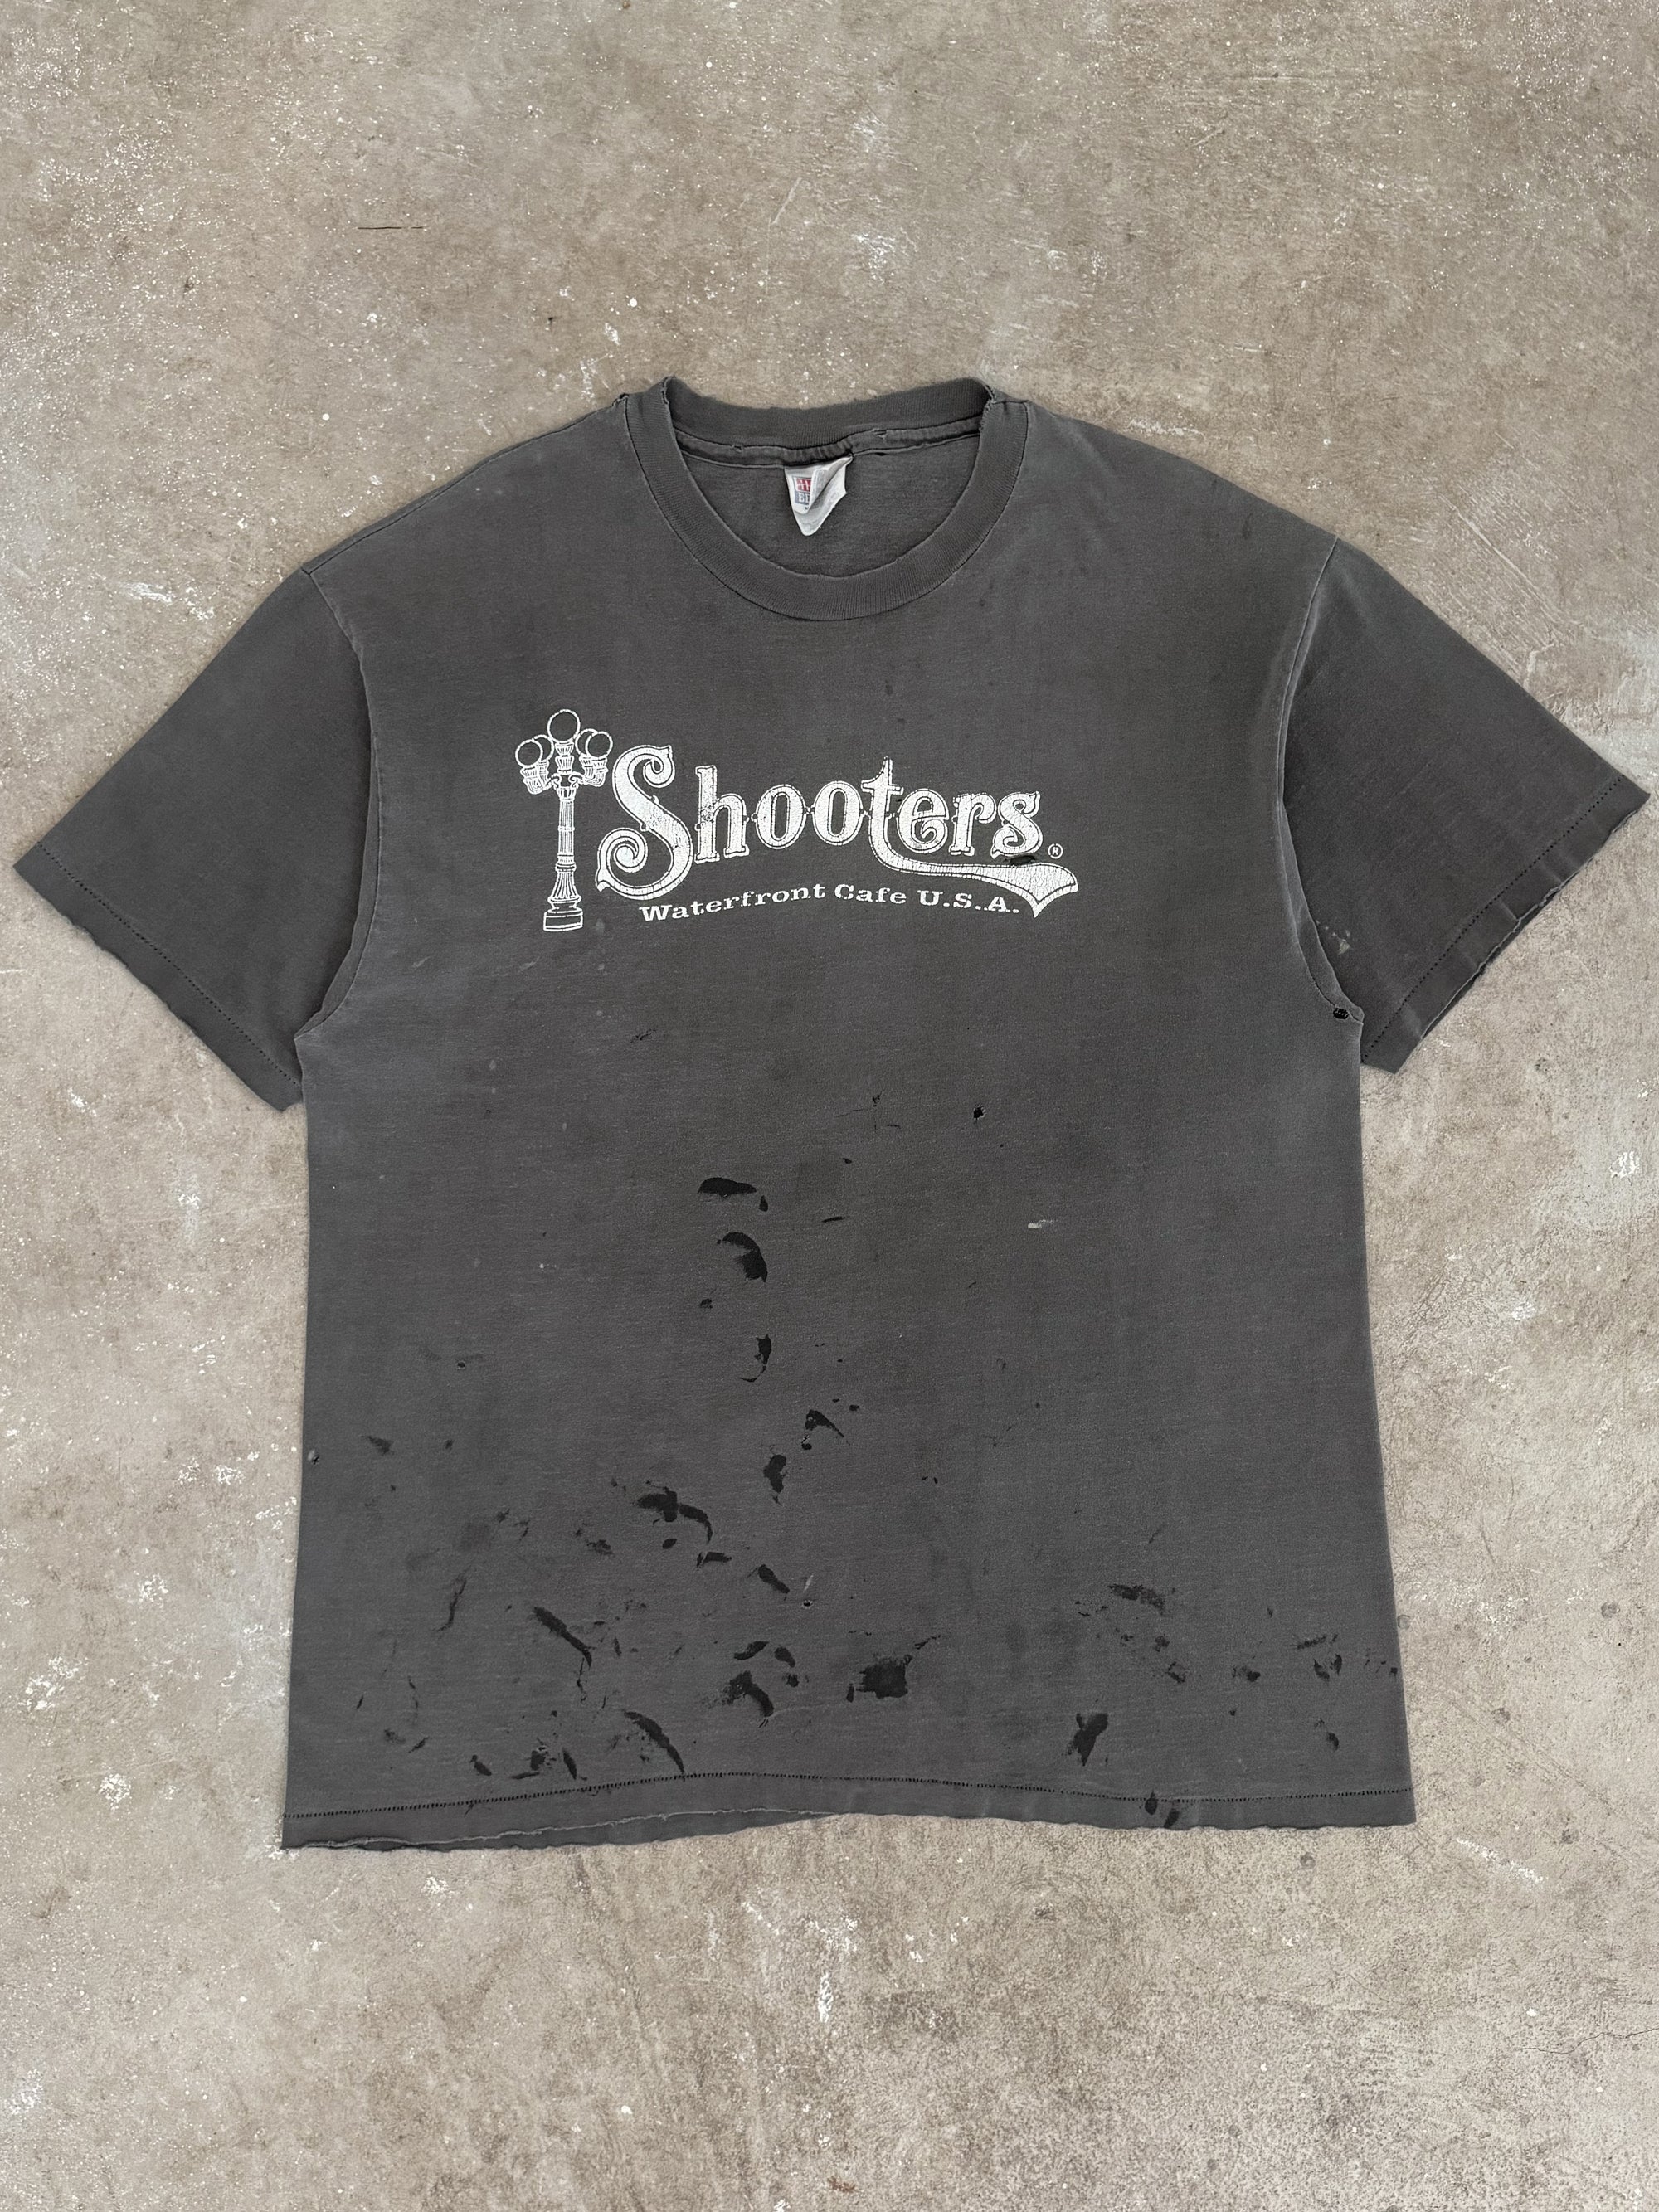 1990s "Shooters" Faded Thrashed Tee (XL)